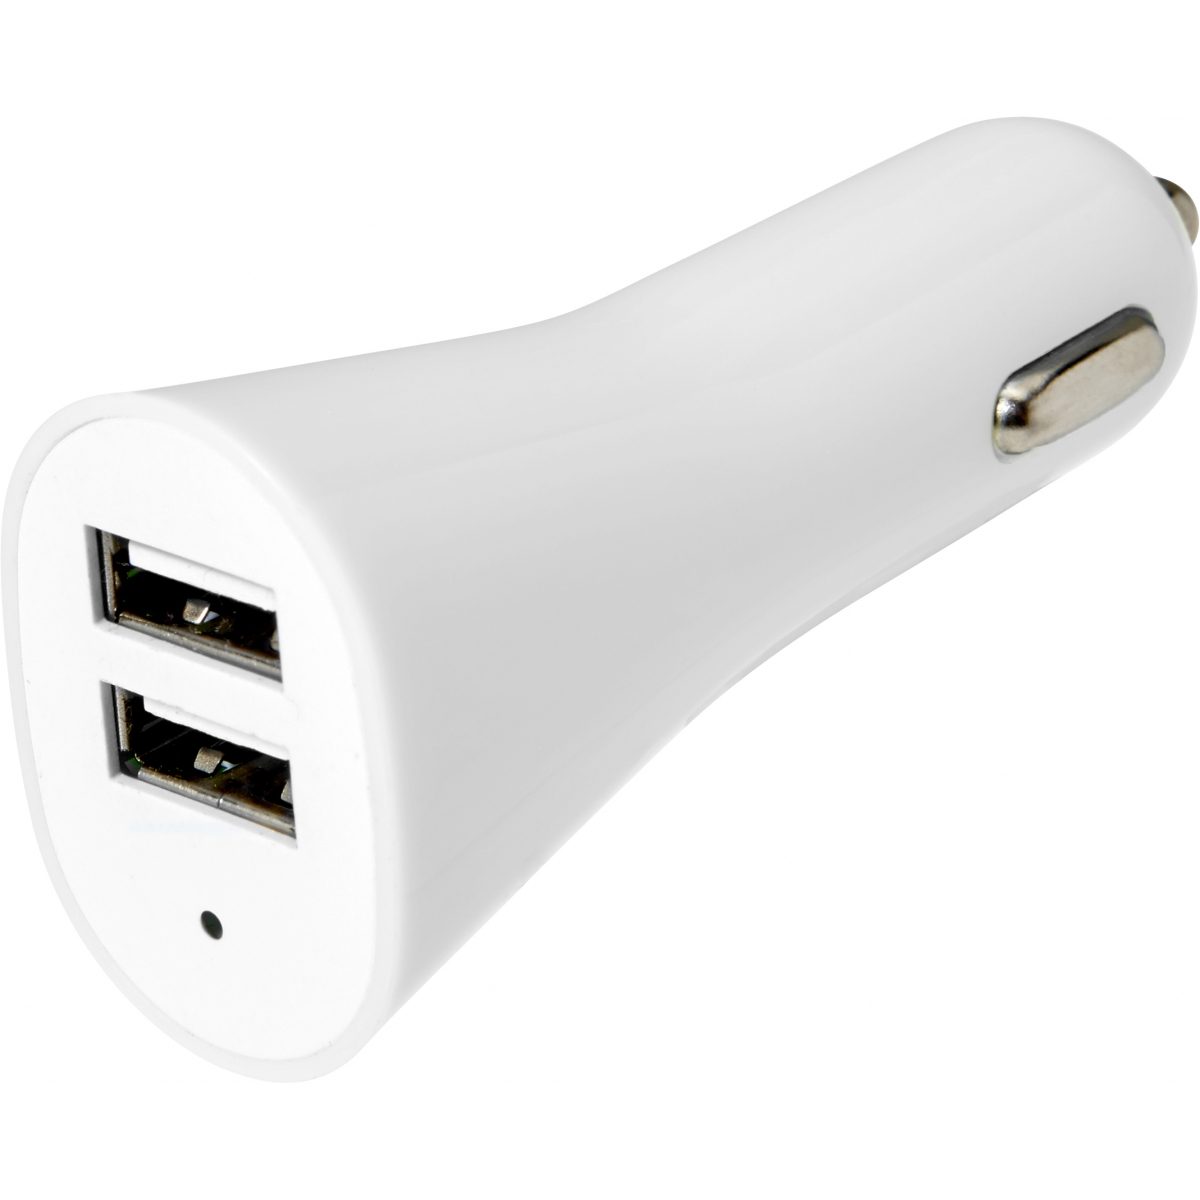 Auto oplader | Dubbele USB Poort | ABS